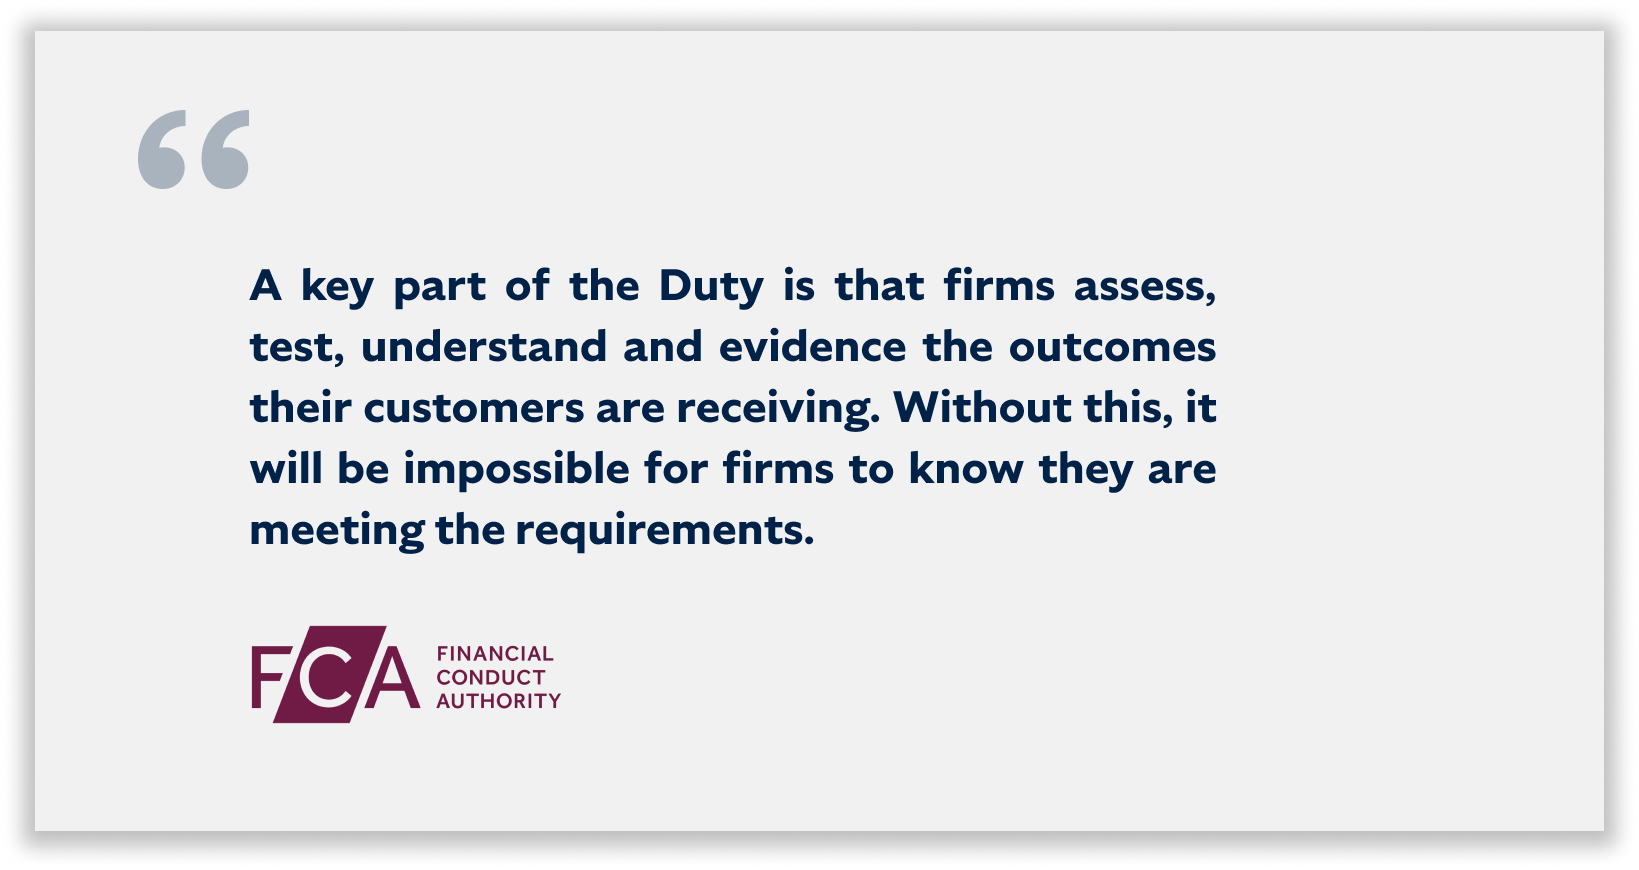  “a key part of the Duty is that firms assess, test, understand and evidence the outcomes their customers are receiving. Without this, it will be impossible for firms to know they are meeting the requirements”